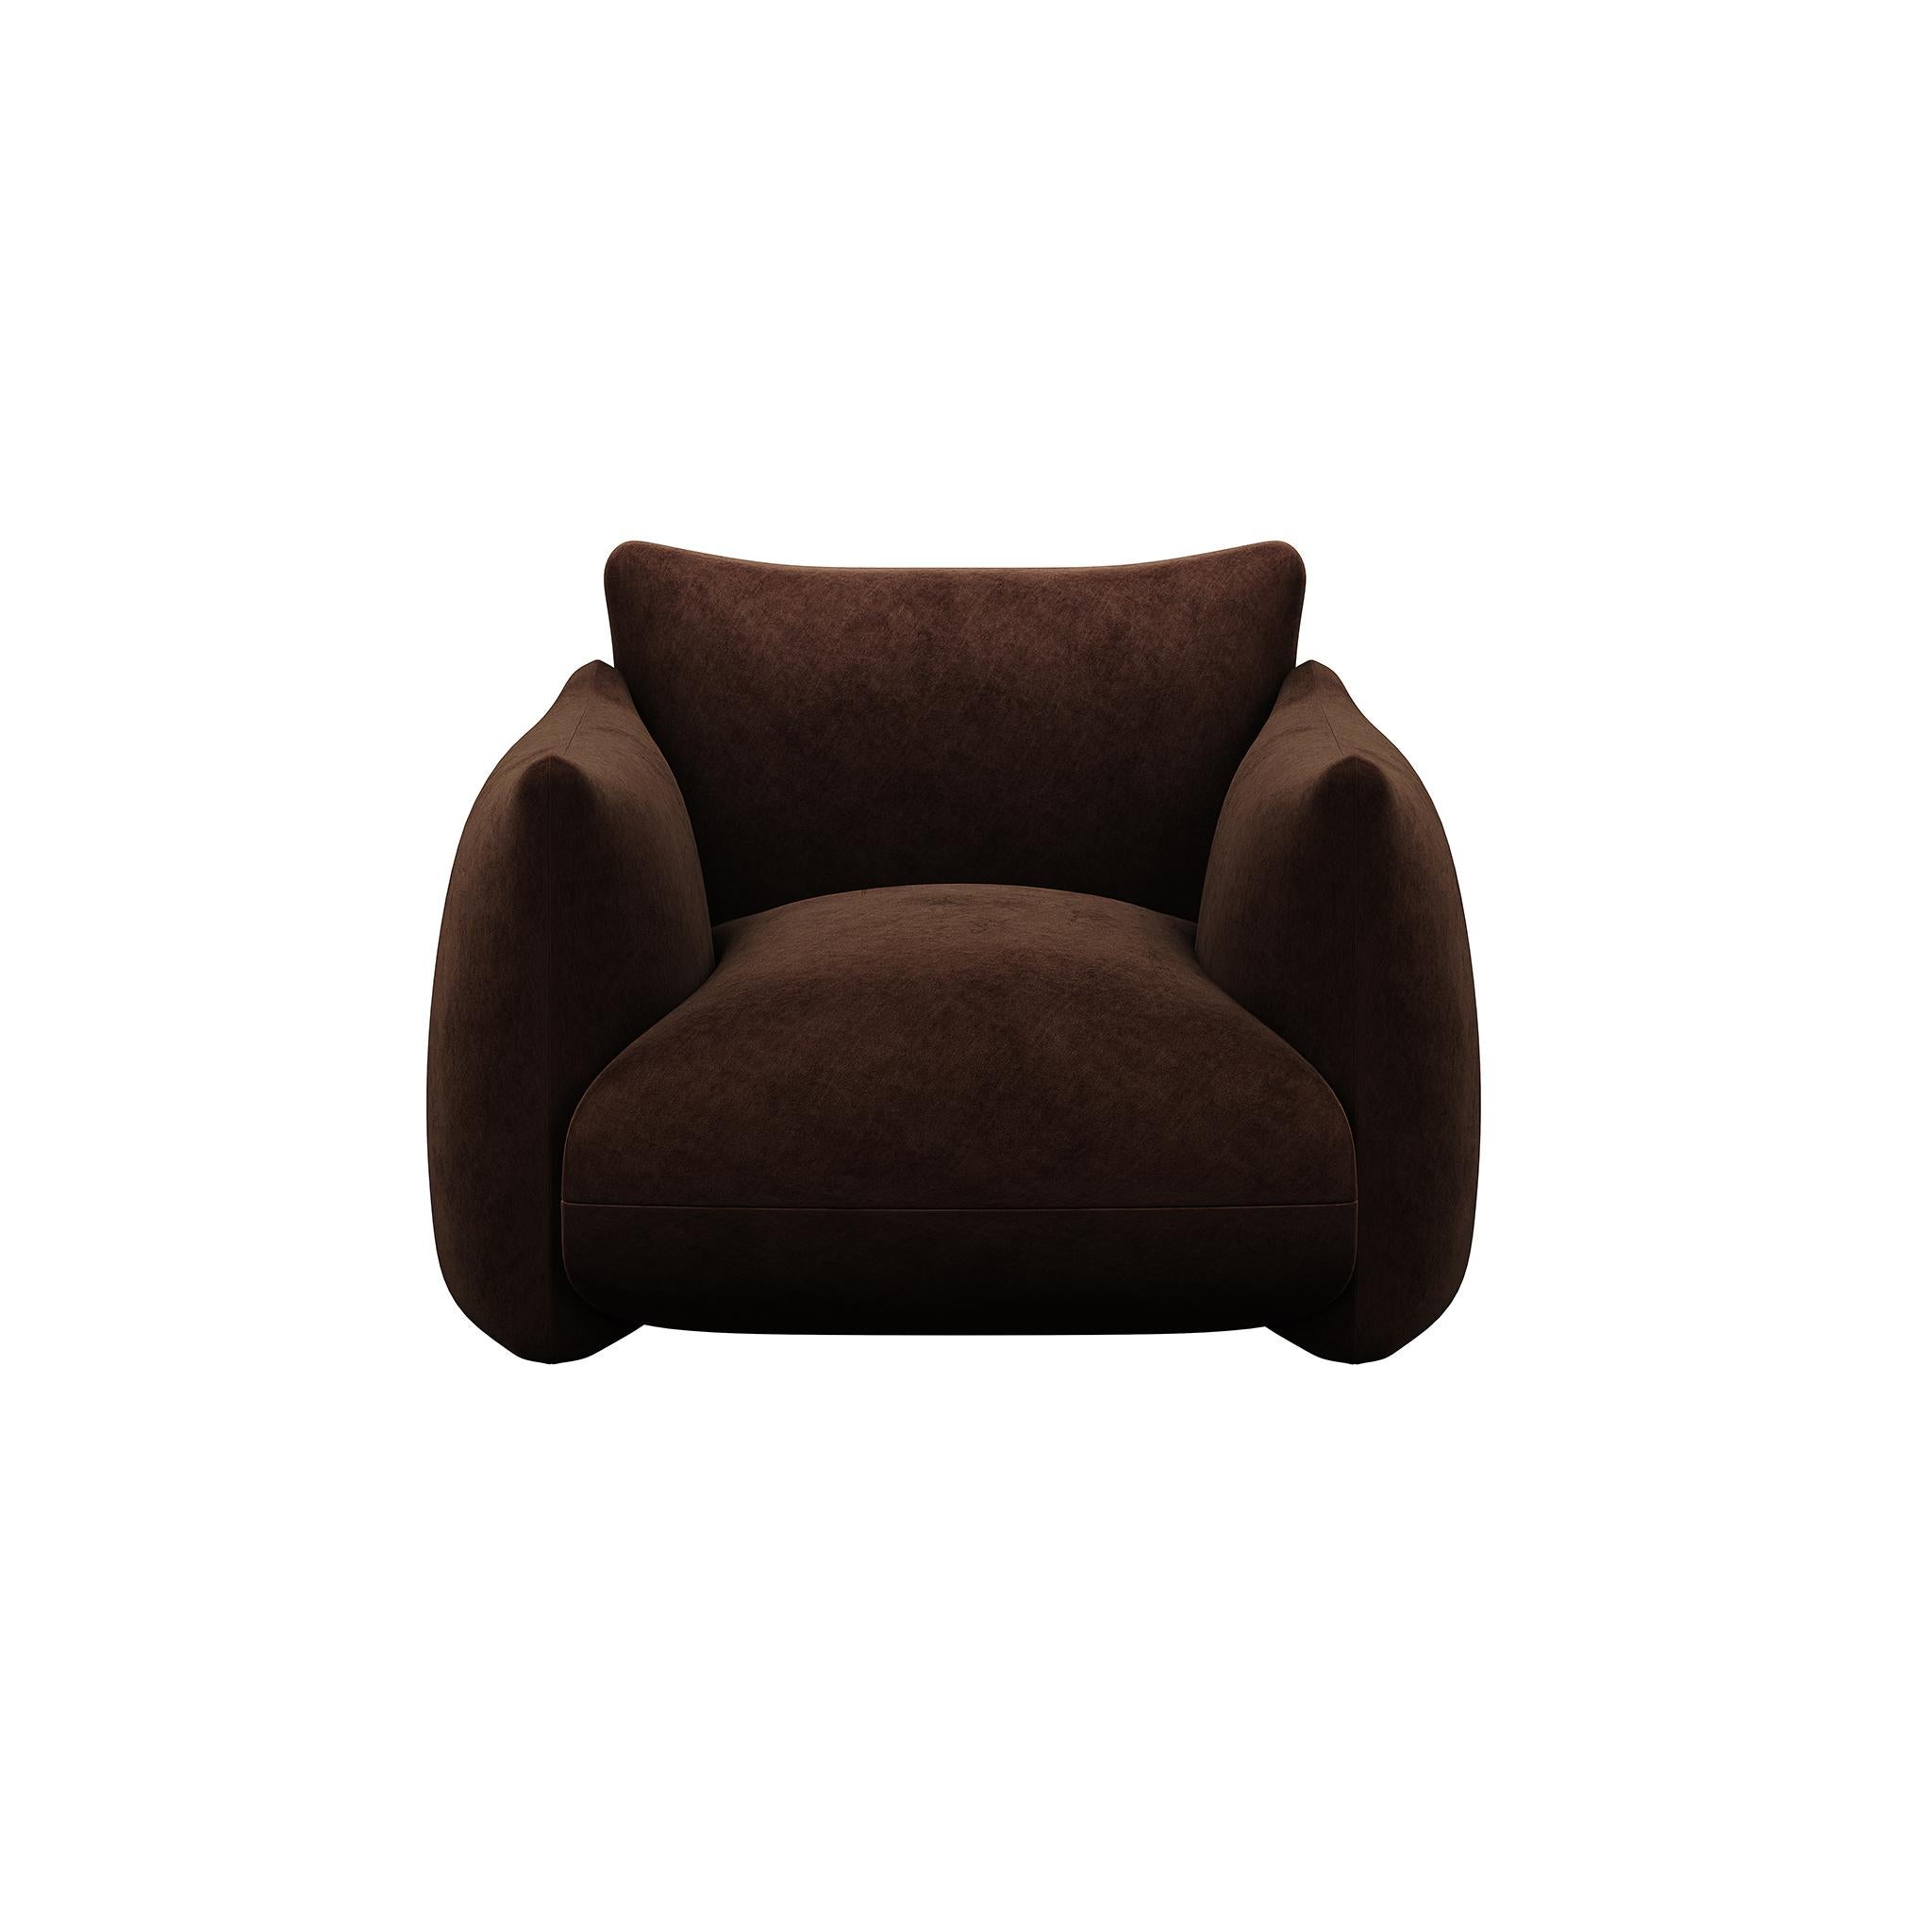 Introducing the epitome of comfort and style – the Full Upholstery Armchair in sumptuous Chocolate Suede.
This armchair is a harmonious fusion of luxurious design and irresistible coziness, making it the perfect addition to any sophisticated